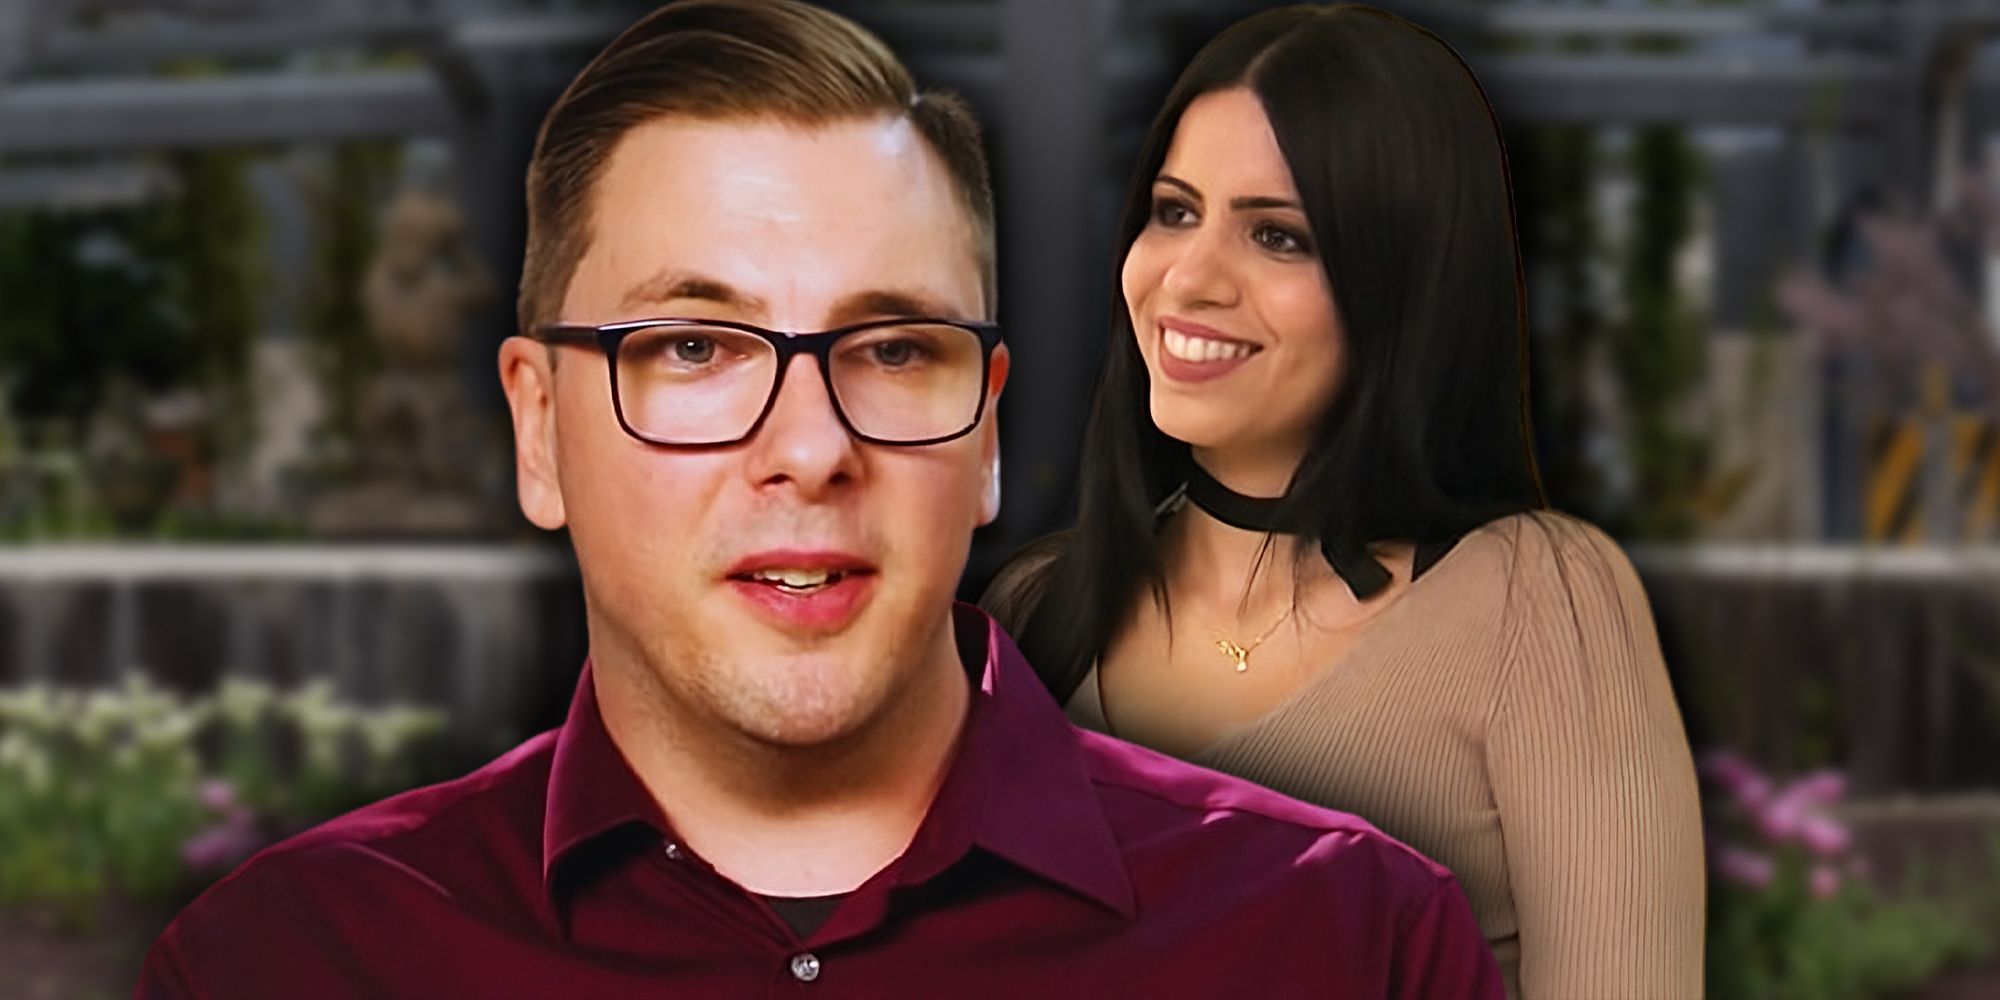 Colt Johnson and Larissa Lima from 90 Day Fiancé, with colt in burgundy and larissa in beige